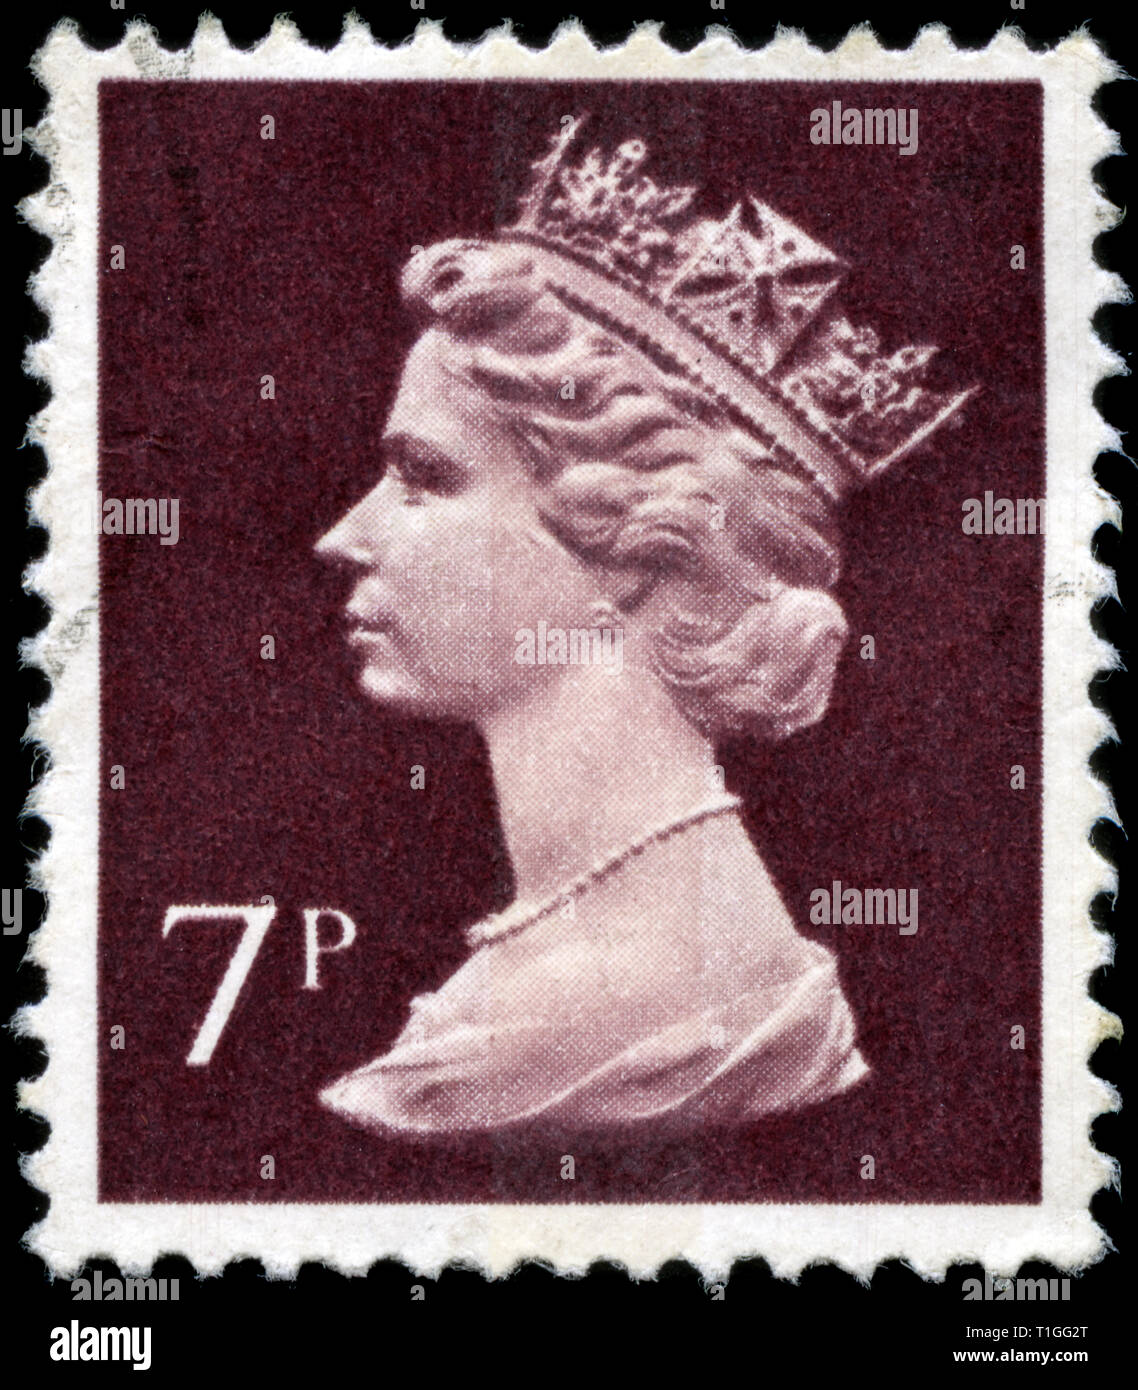 Postage stamp from the United Kingdom and Northern Ireland in the Queen Elizabeth II - Decimal Machin - Normal Perfs series issued in 1977 Stock Photo